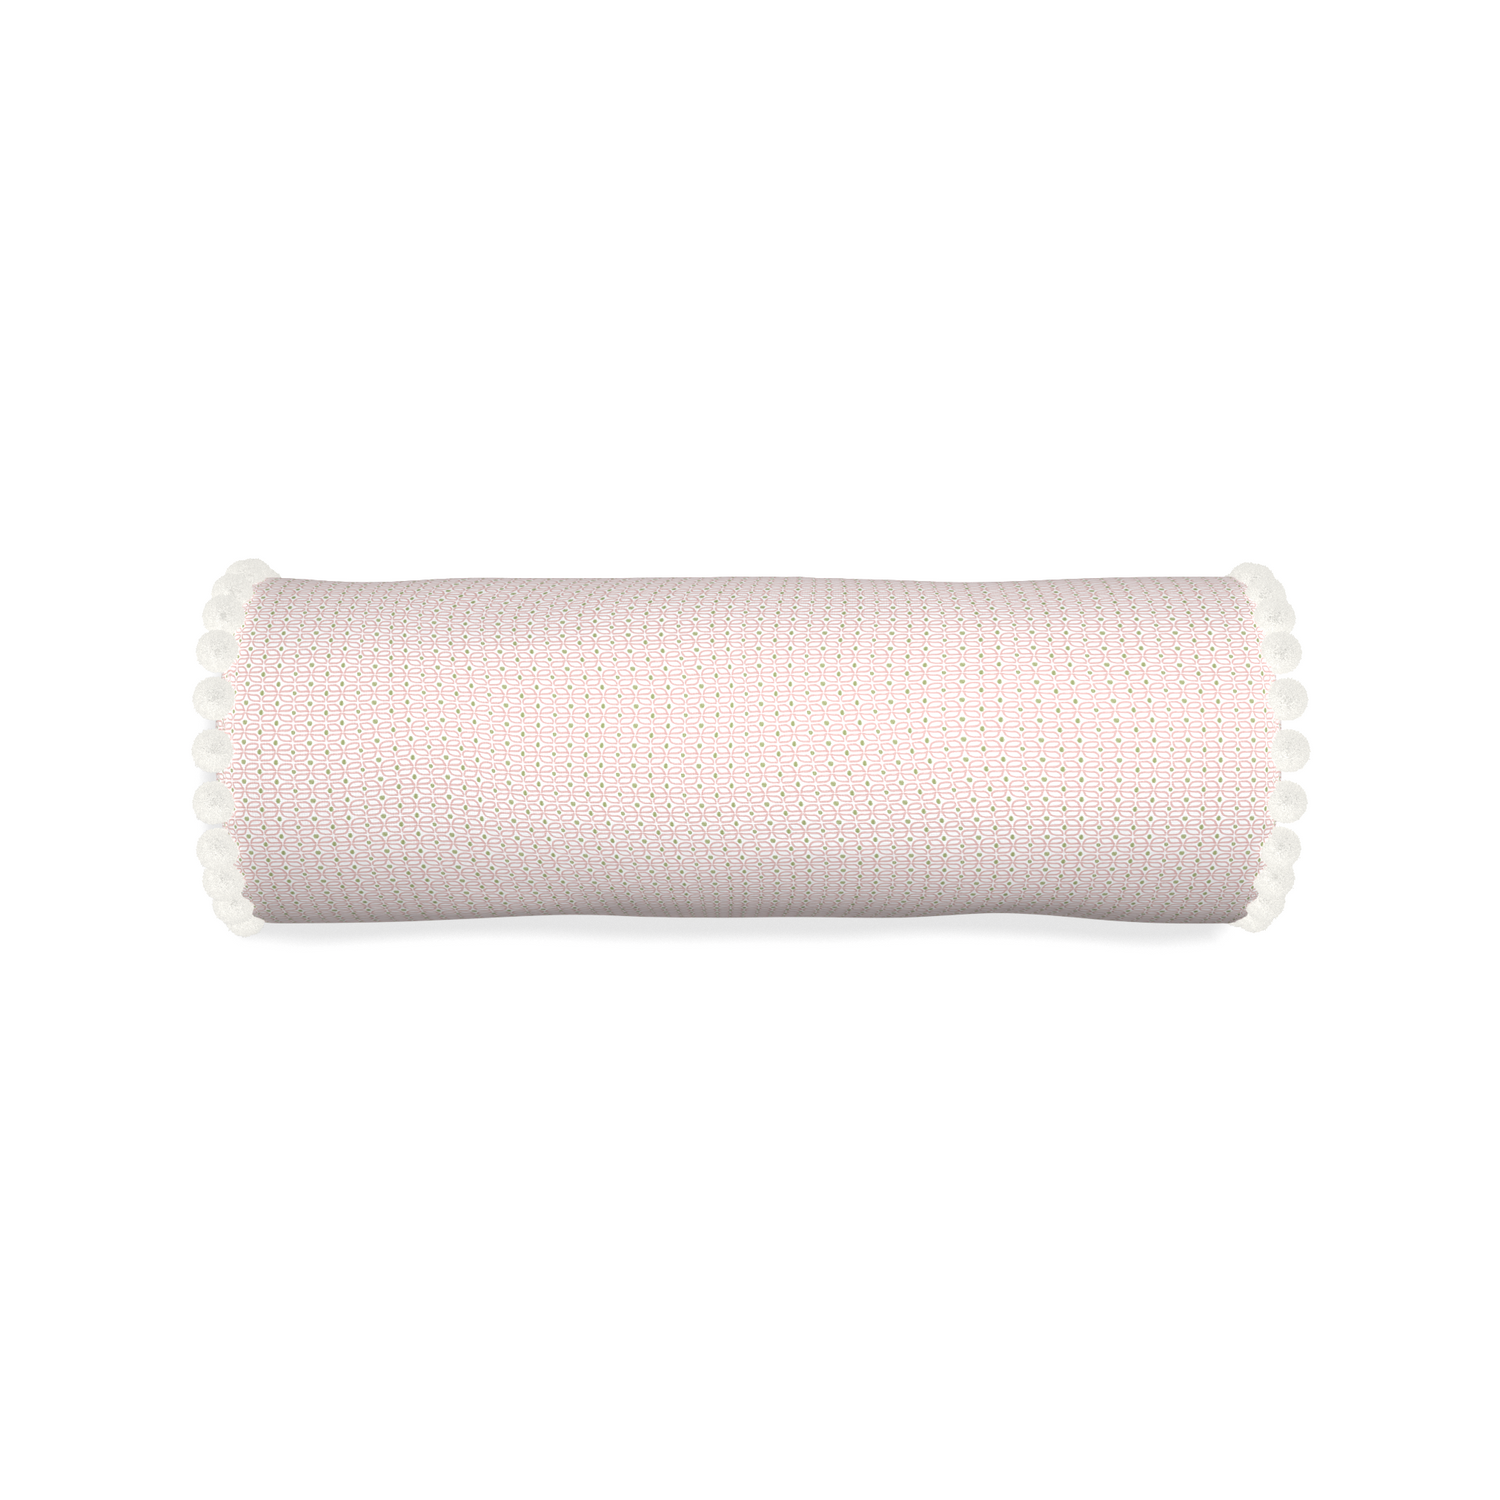 Bolster loomi pink custom pink geometricpillow with snow pom pom on white background